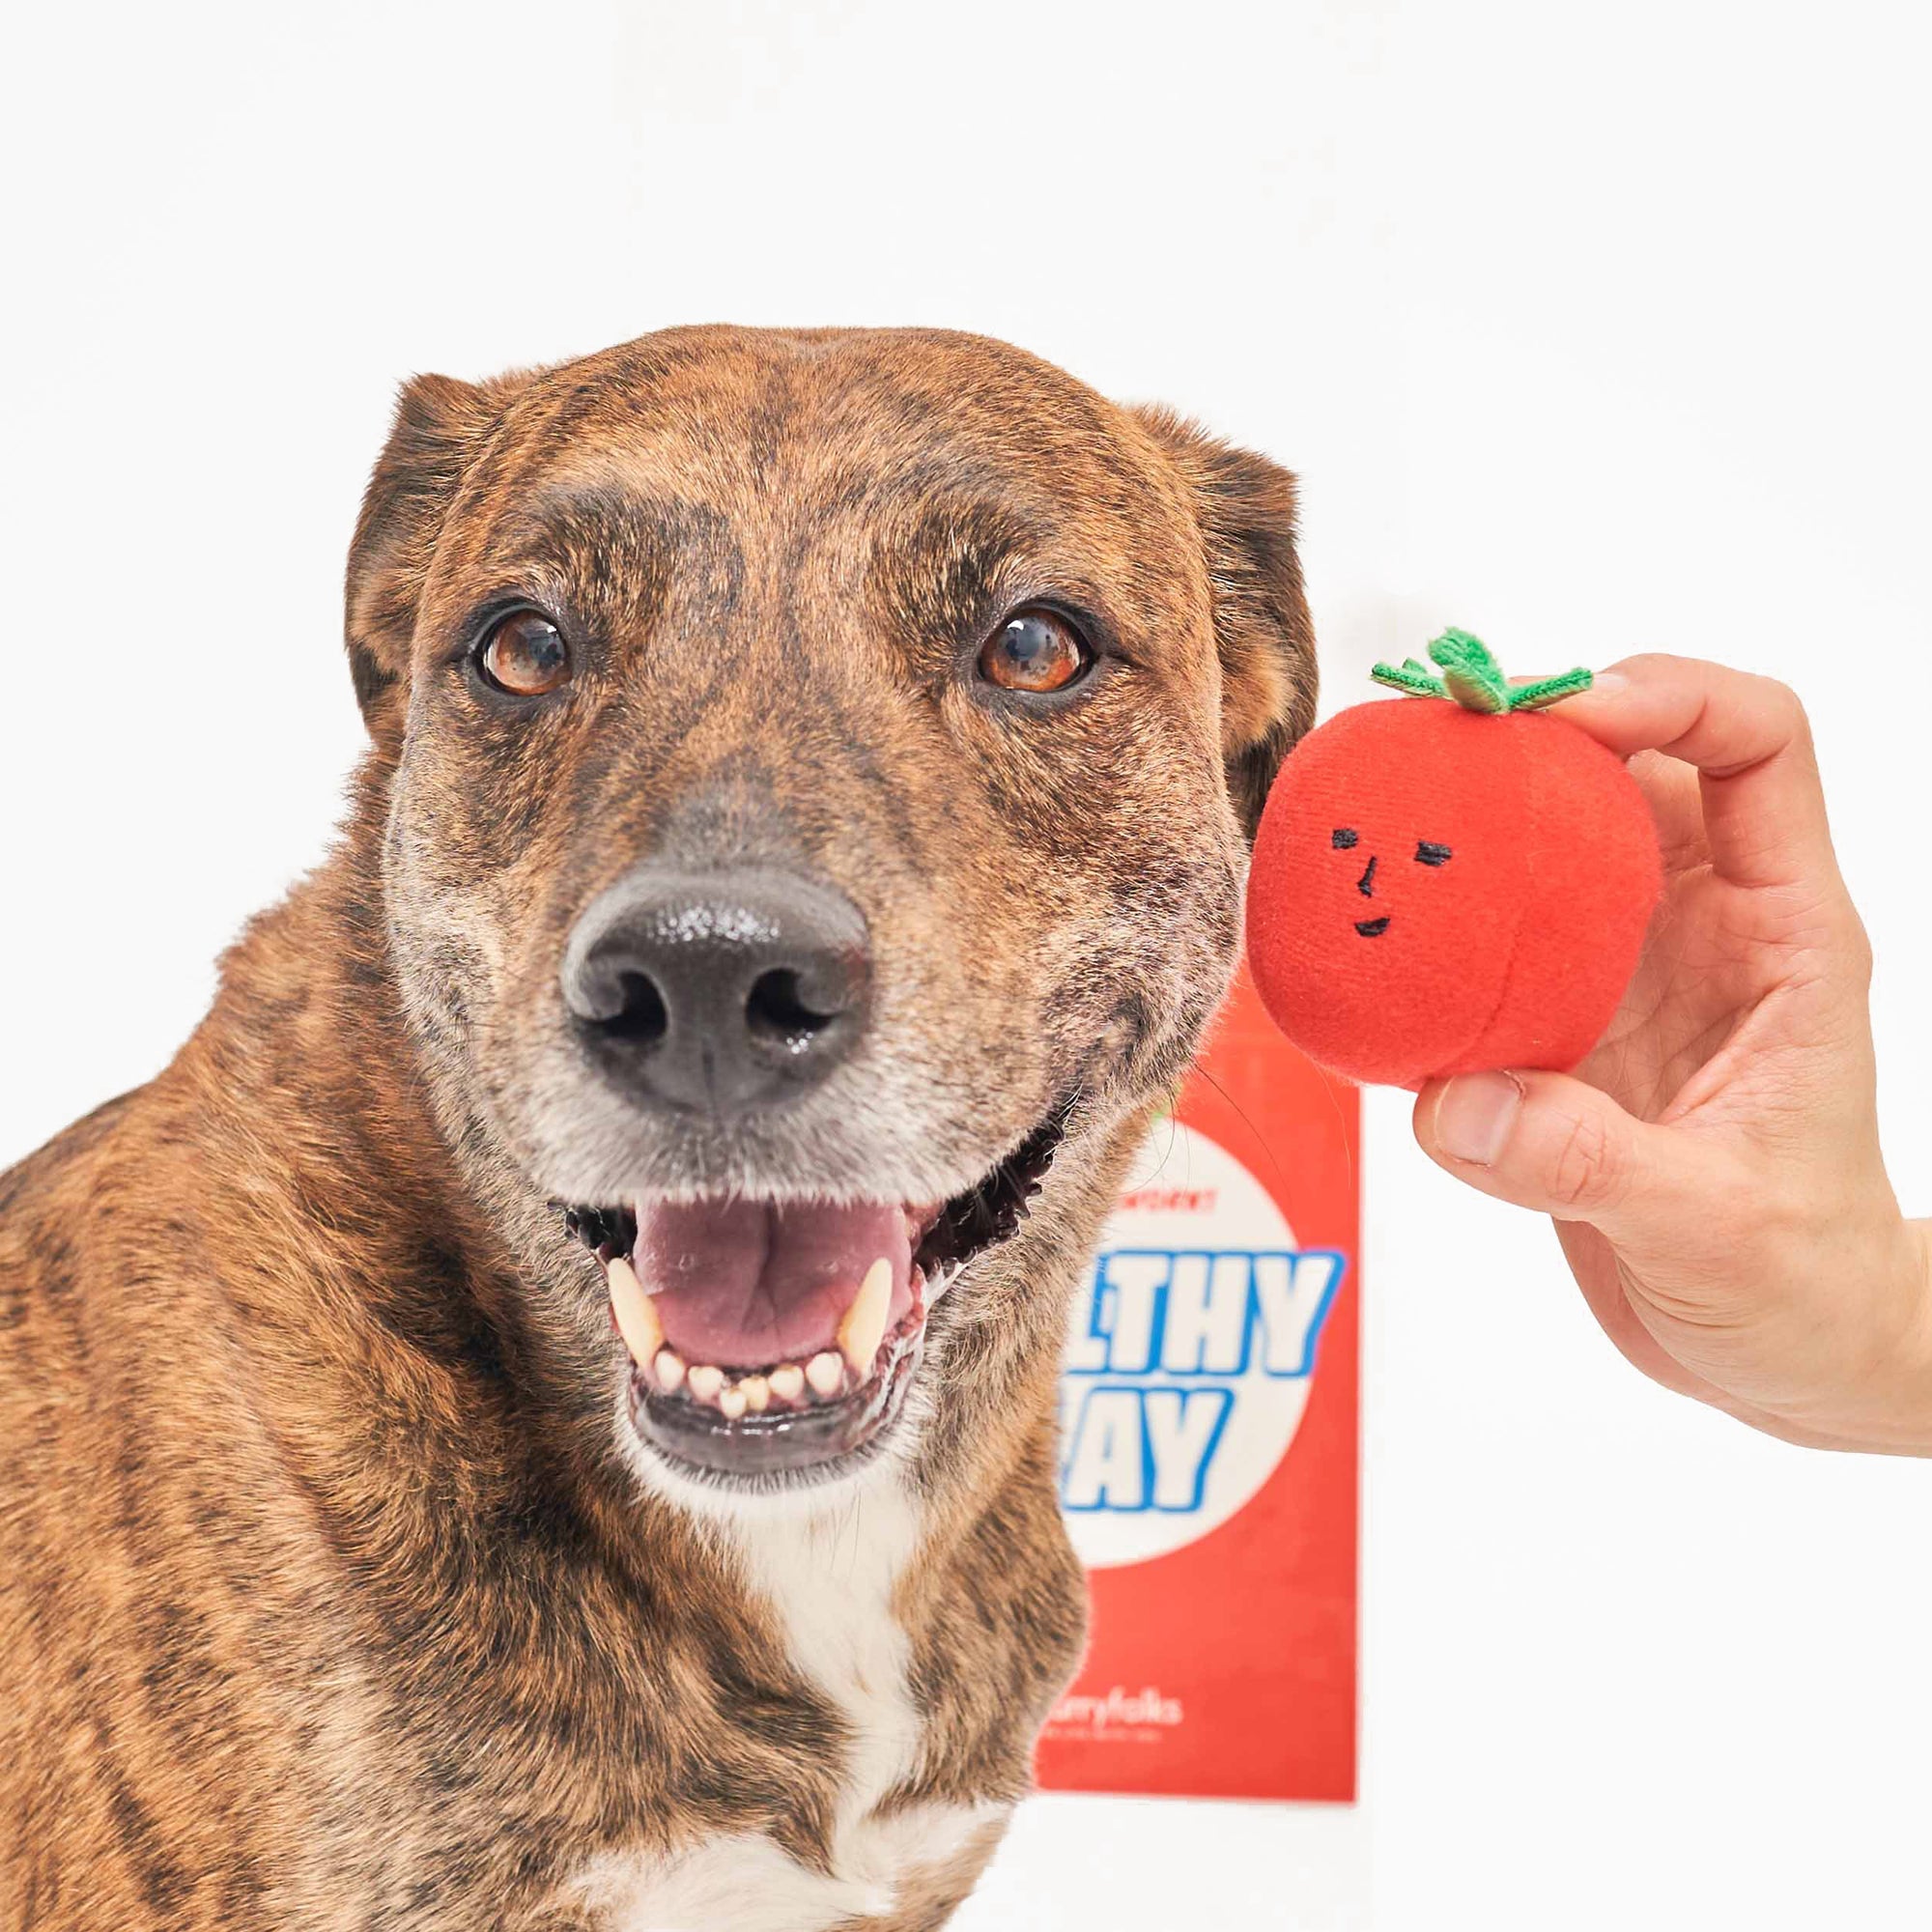 The image features a brindle-coated dog with a happy and excited expression. A human hand is holding a small plush tomato toy near the dog's face, likely part of a play session. The background includes a blurred sign saying "HEALTHY PLAY," suggesting a health-themed event or environment.